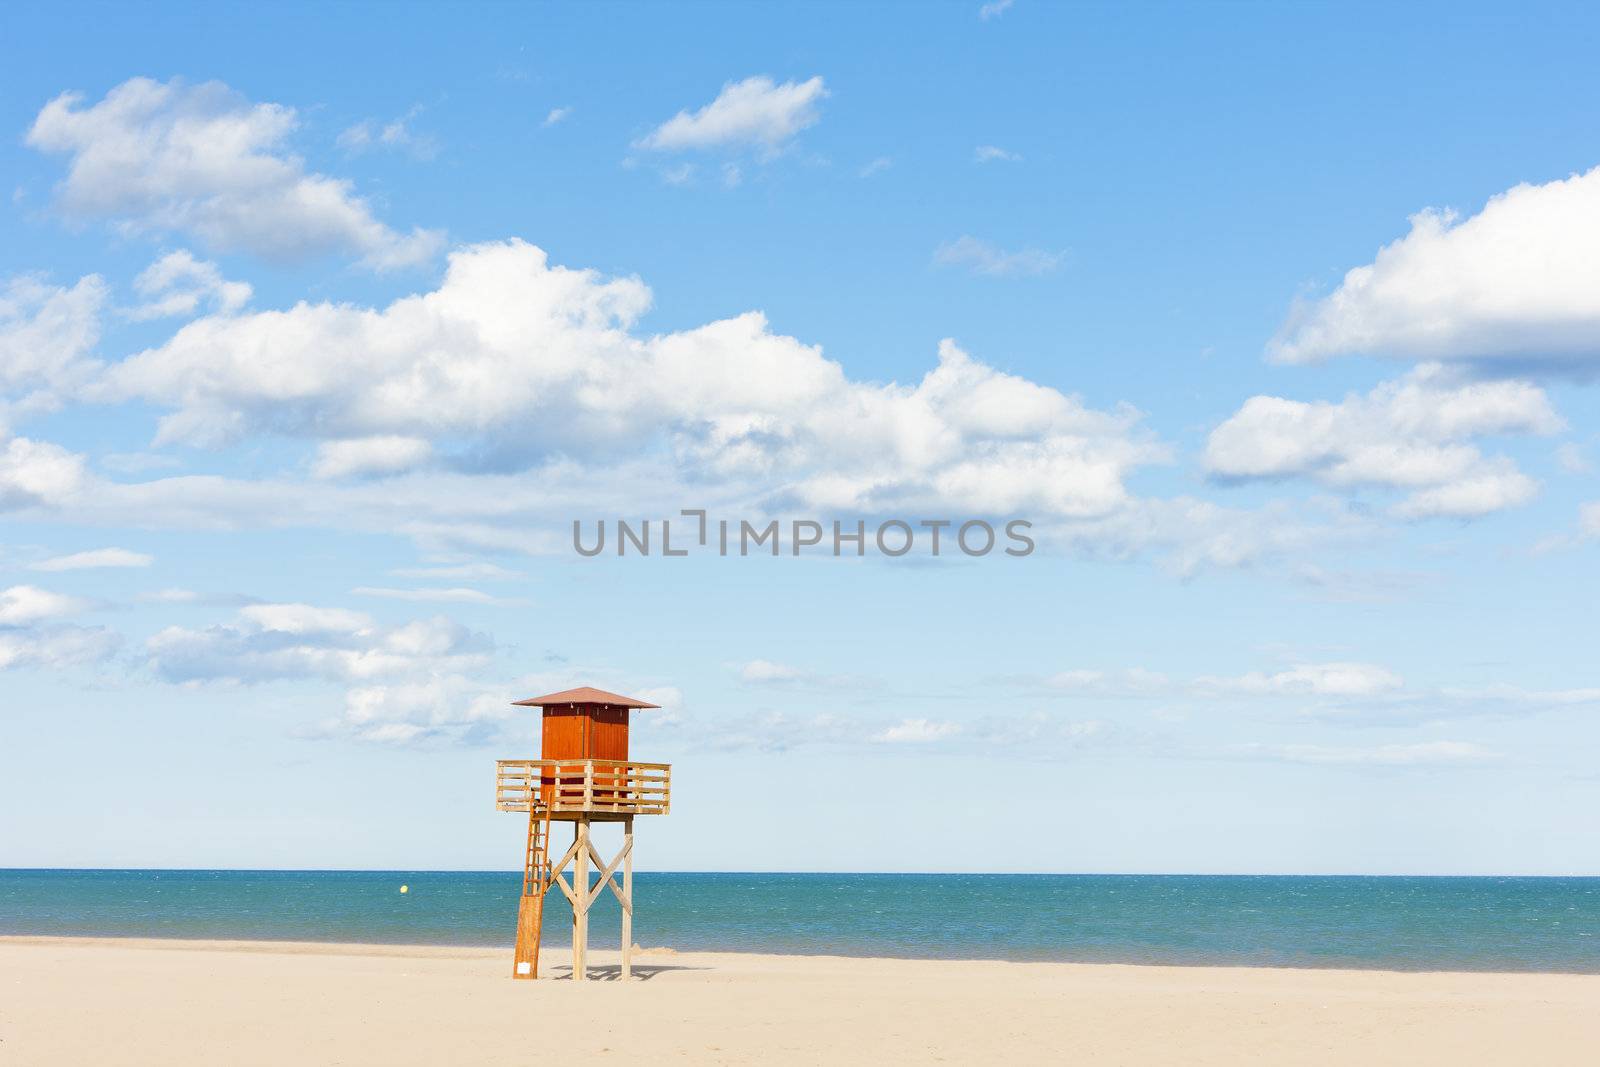 lifeguard cabin on the beach in Narbonne Plage, Languedoc-Roussi by phbcz